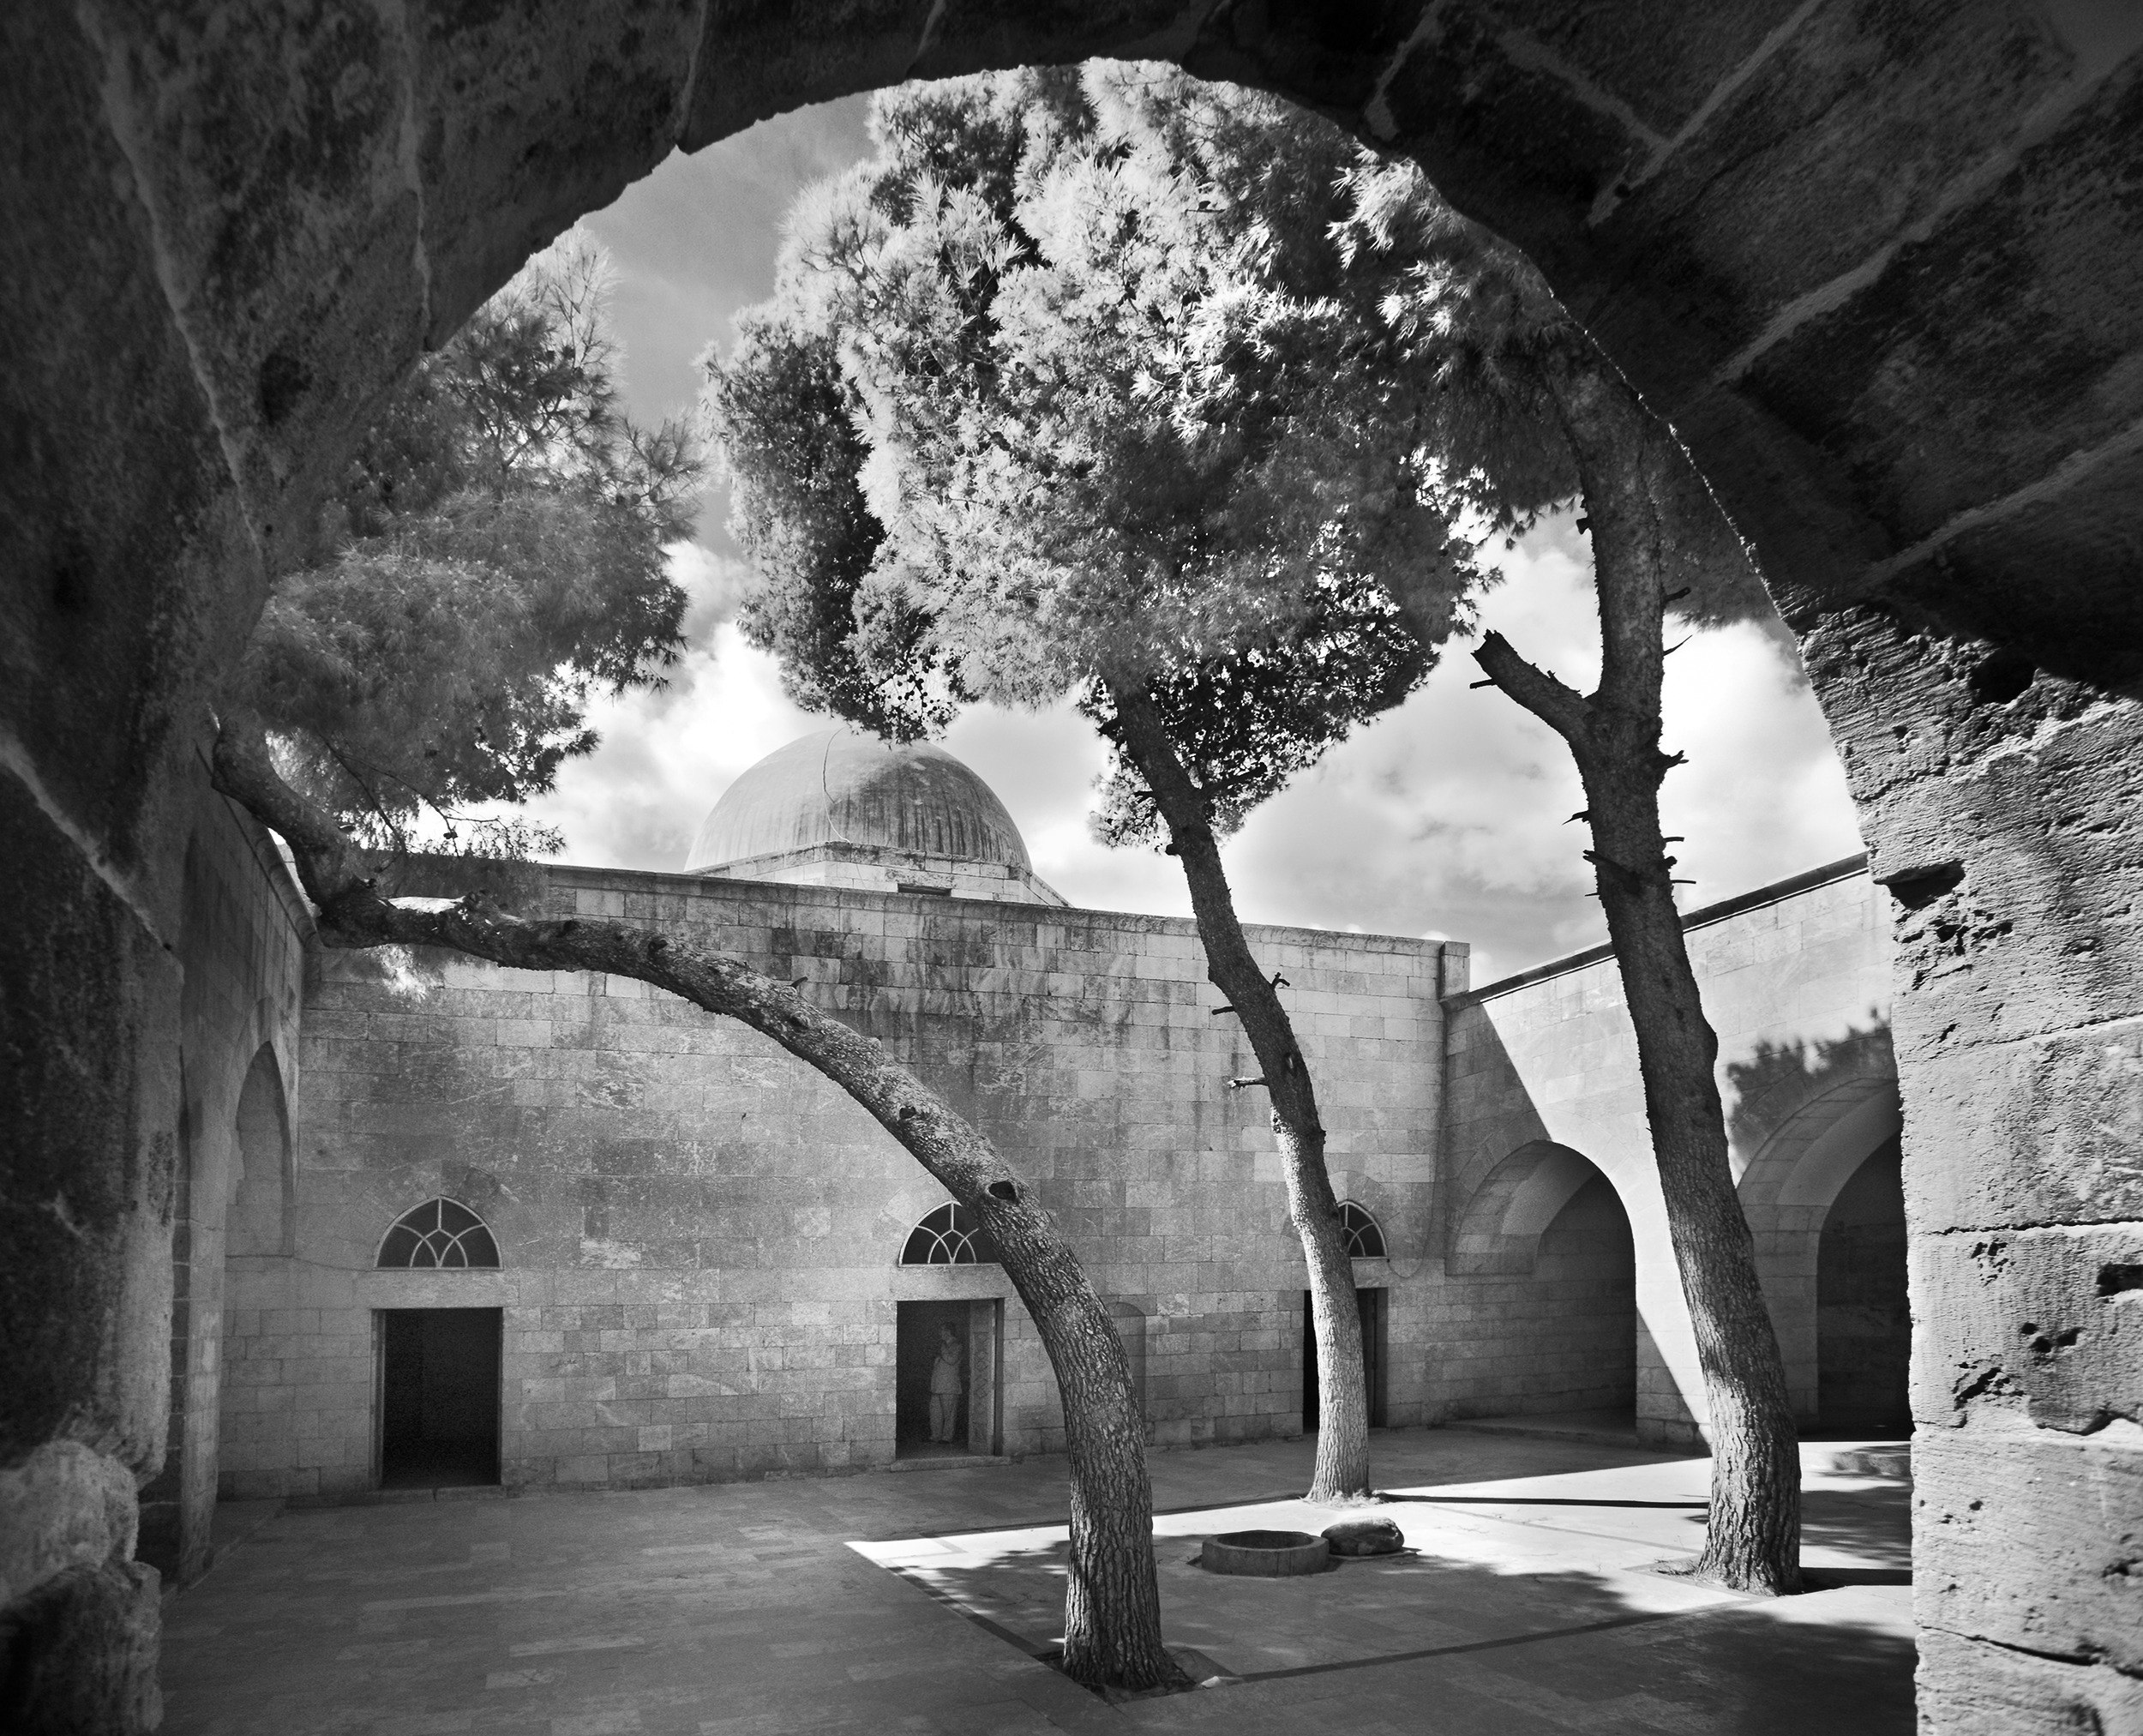 Inside court of the Mosque of Abraham in the Citadel of Aleppo, Syria.